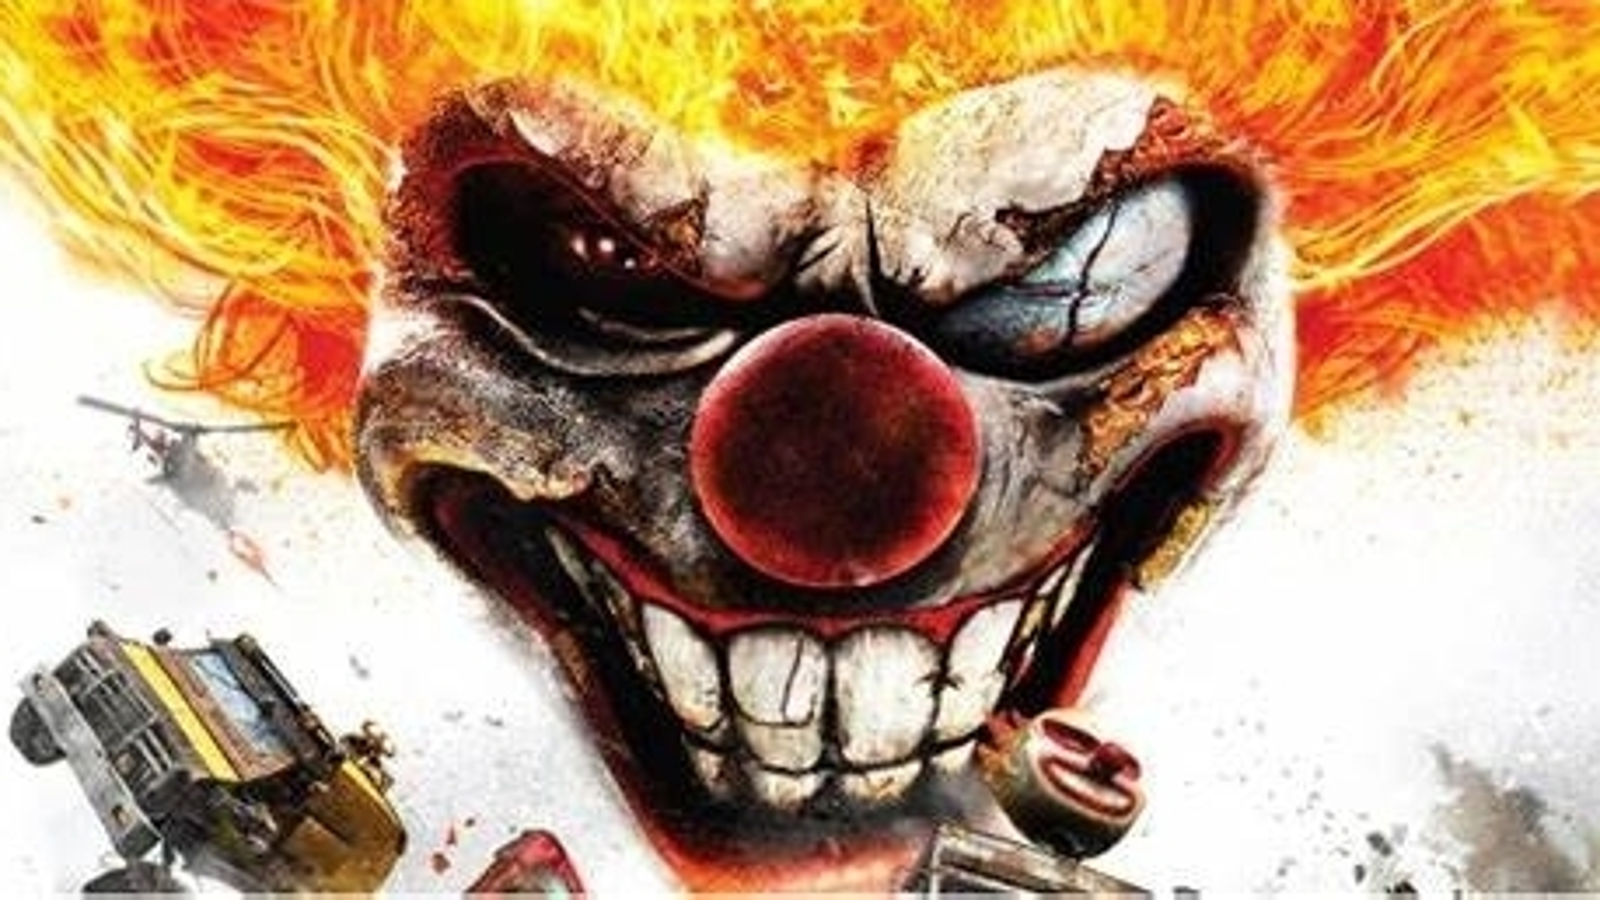 New Twisted Metal game coming to PS5 from Destruction AllStars studio -  Polygon